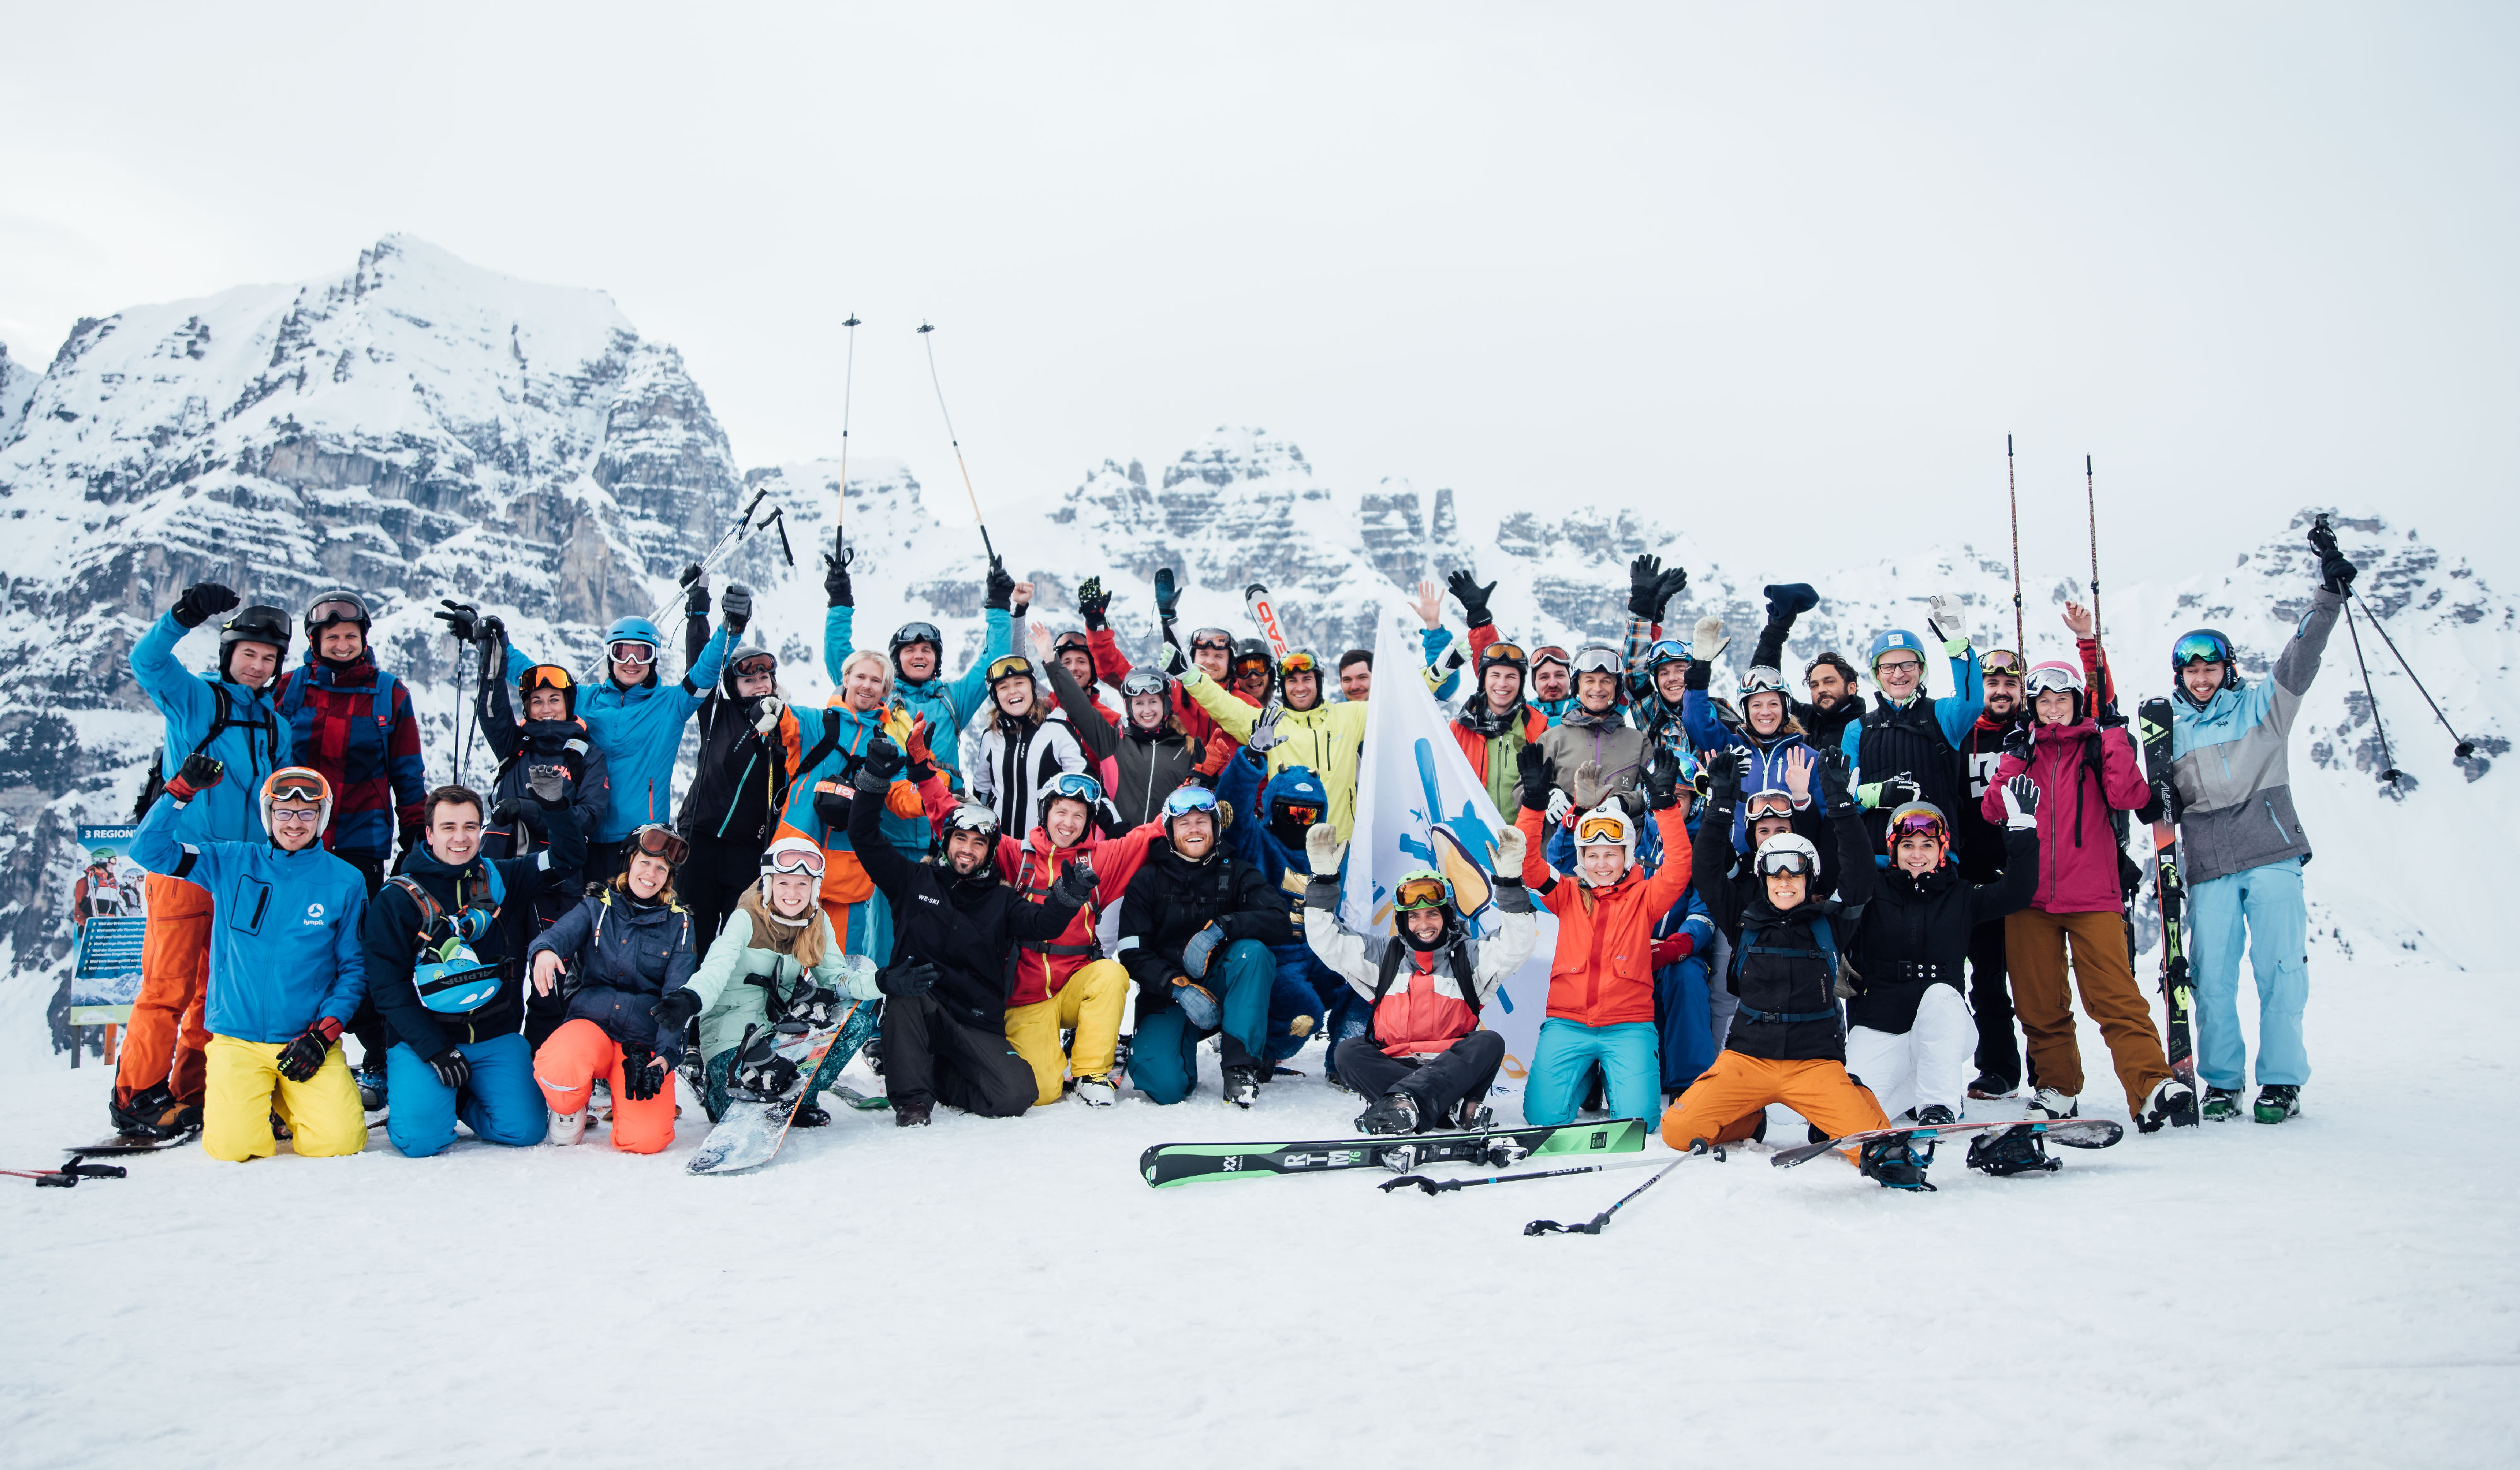 Skinnovation 2019: The first startup conference on skis | AlphaGamma